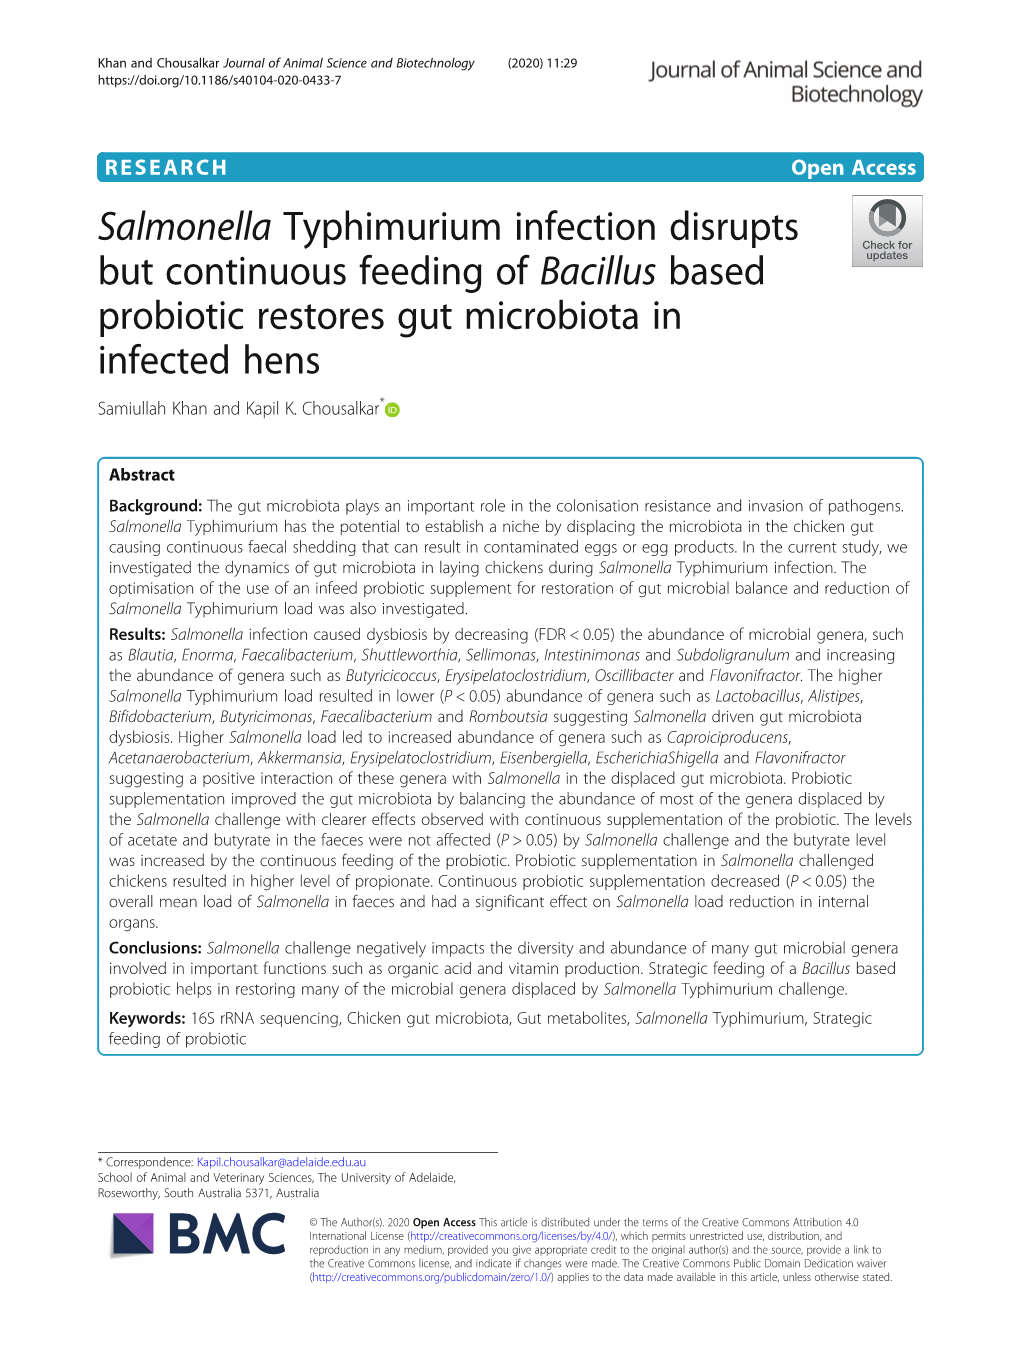 Salmonella Typhimurium Infection Disrupts but Continuous Feeding of Bacillus Based Probiotic Restores Gut Microbiota in Infected Hens Samiullah Khan and Kapil K